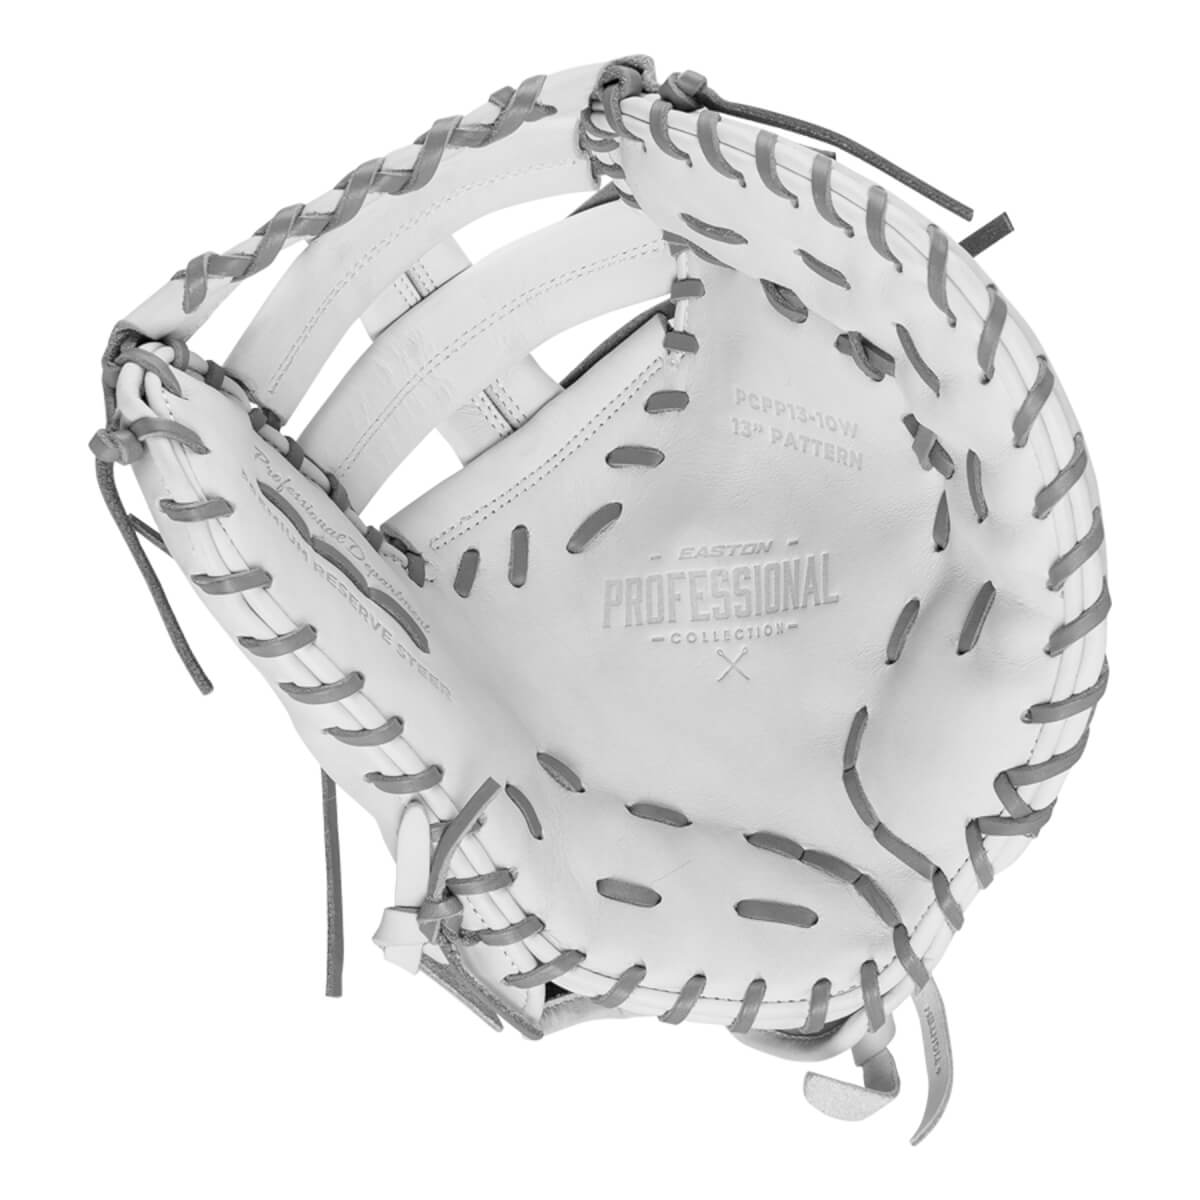 Easton Pro Collection 13" Fastpitch Softball First Base Mitt/Glove - PCFP13-10W